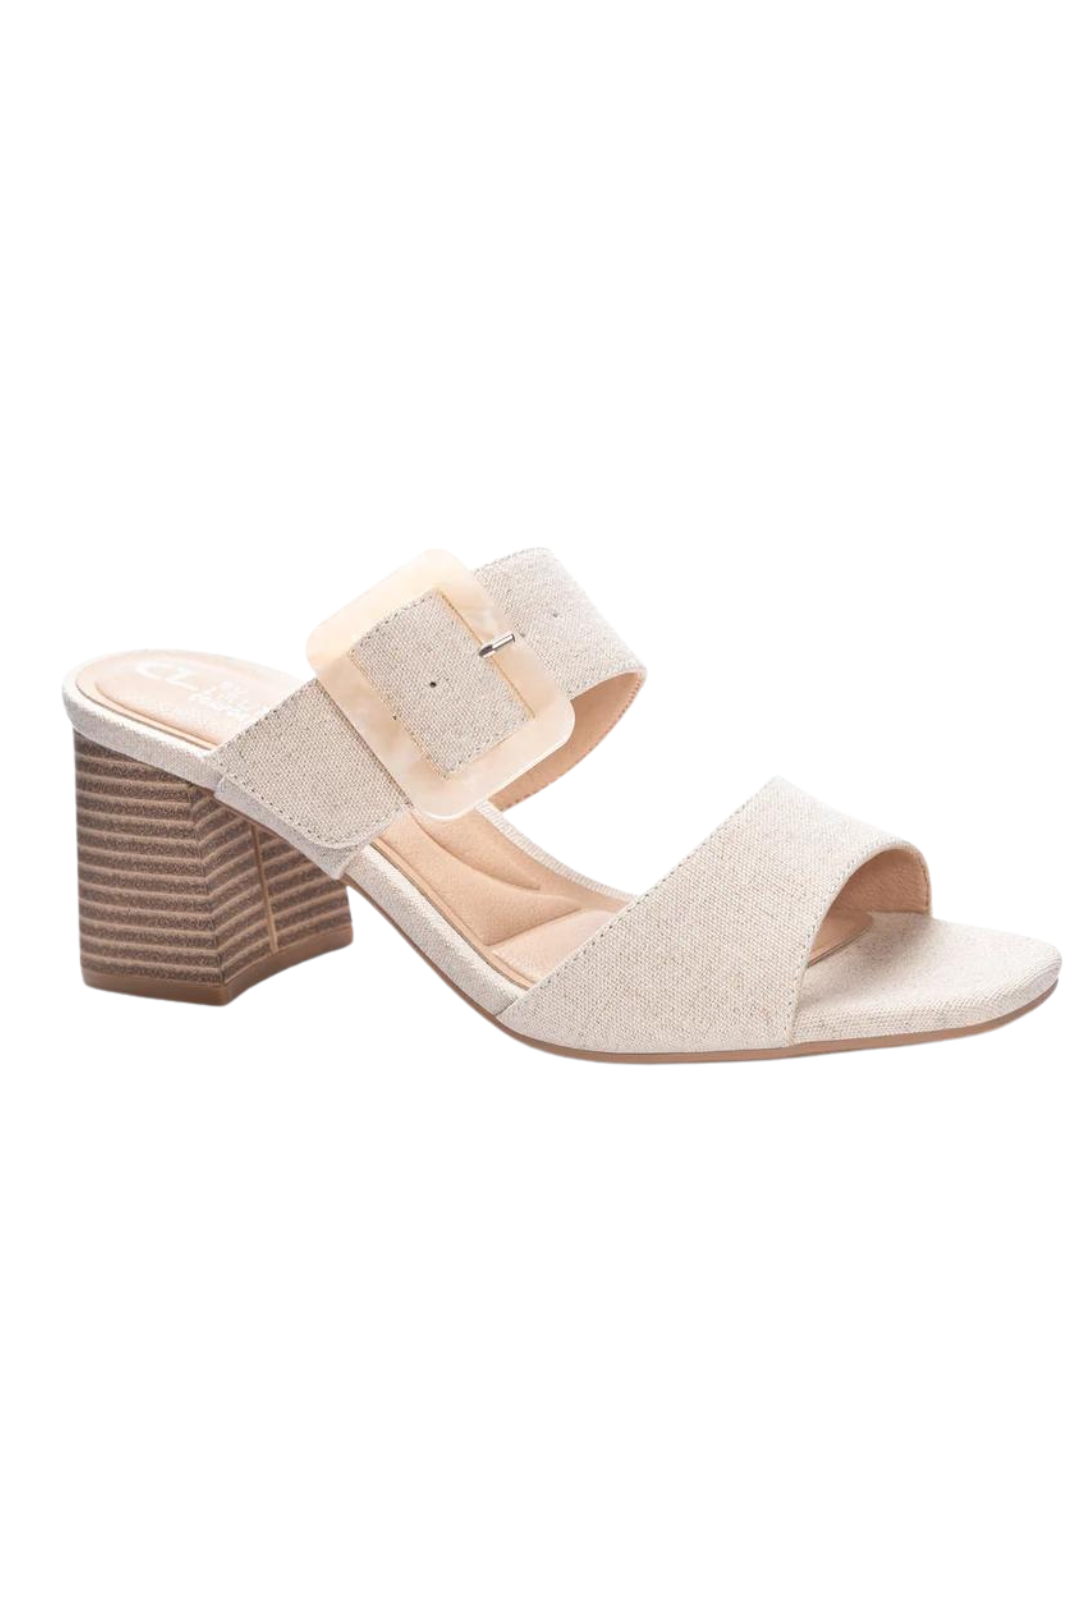 Chinese Laundry Briana Slide Sandal- Natural. Update warm weather looks by pairing these women's CL by Laundry Briana natural sandals with your favourite jeans, skirts, dresses, and more.